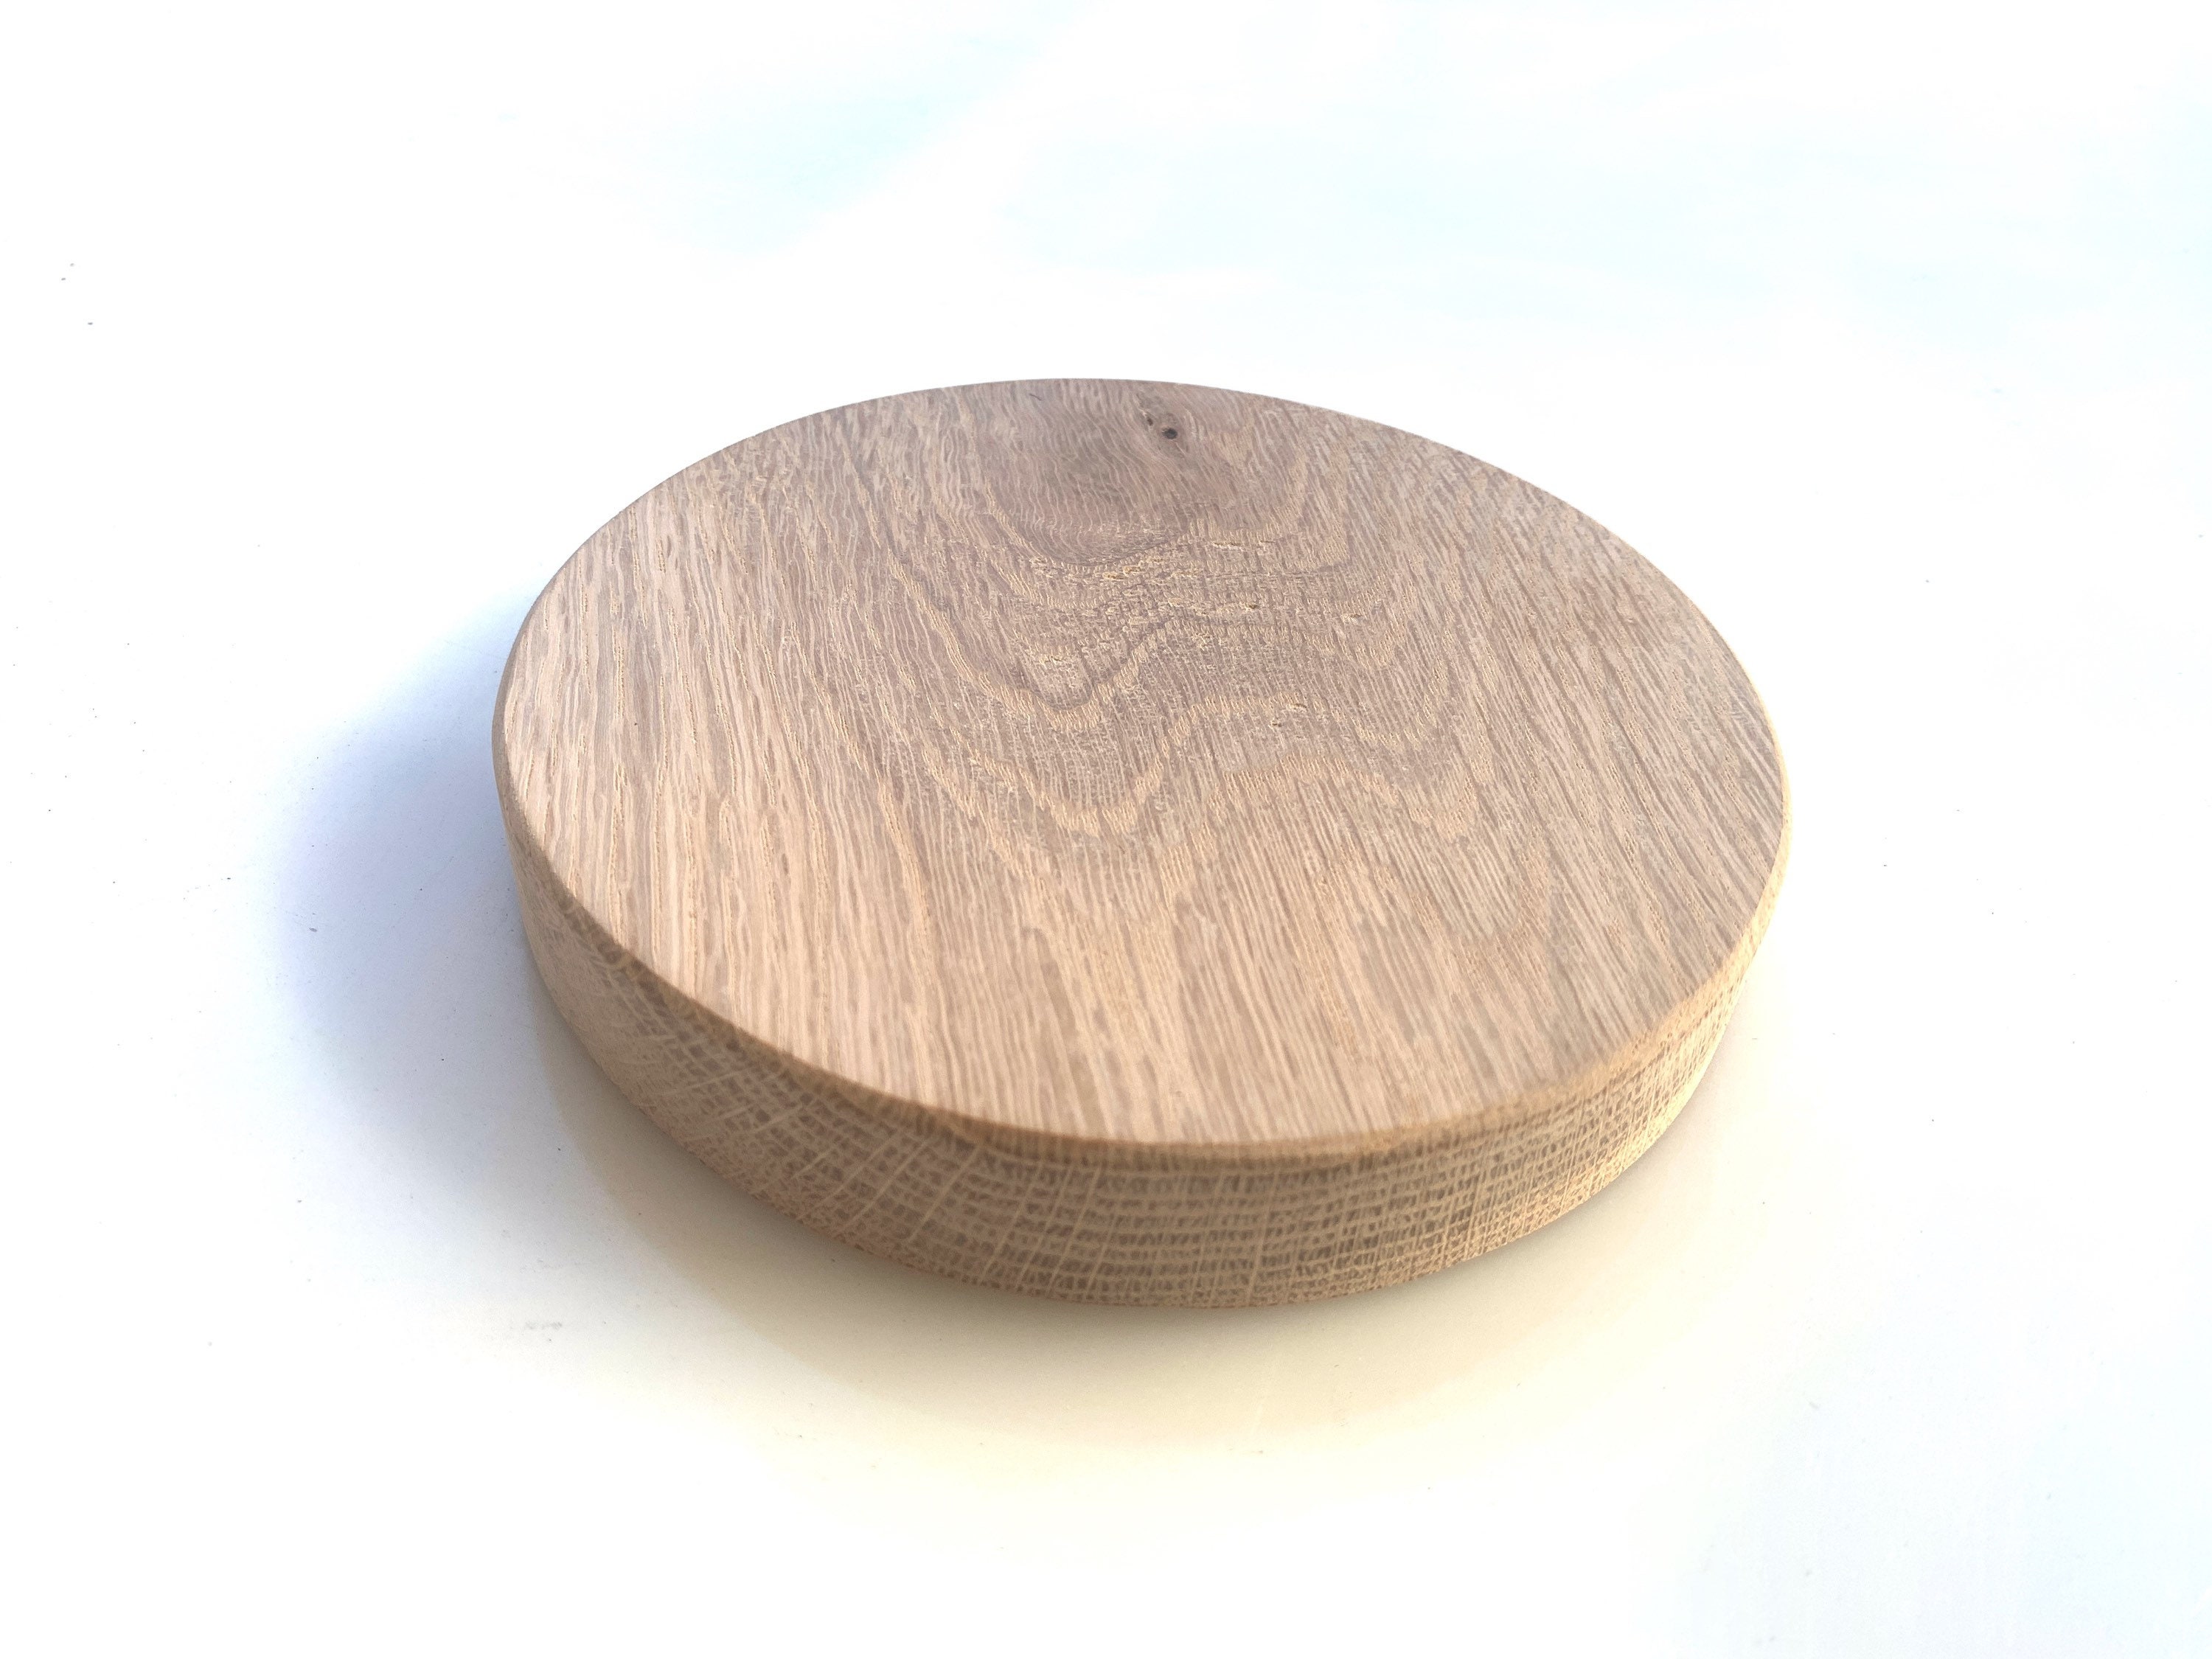 1.5 Inch Wood Circles, 1/4 Inch Thick Birch 1 1/2 Inch Diameter Birch Wood  Rounds, Craft Supplies, DIY Wooden Circles for Crafting 